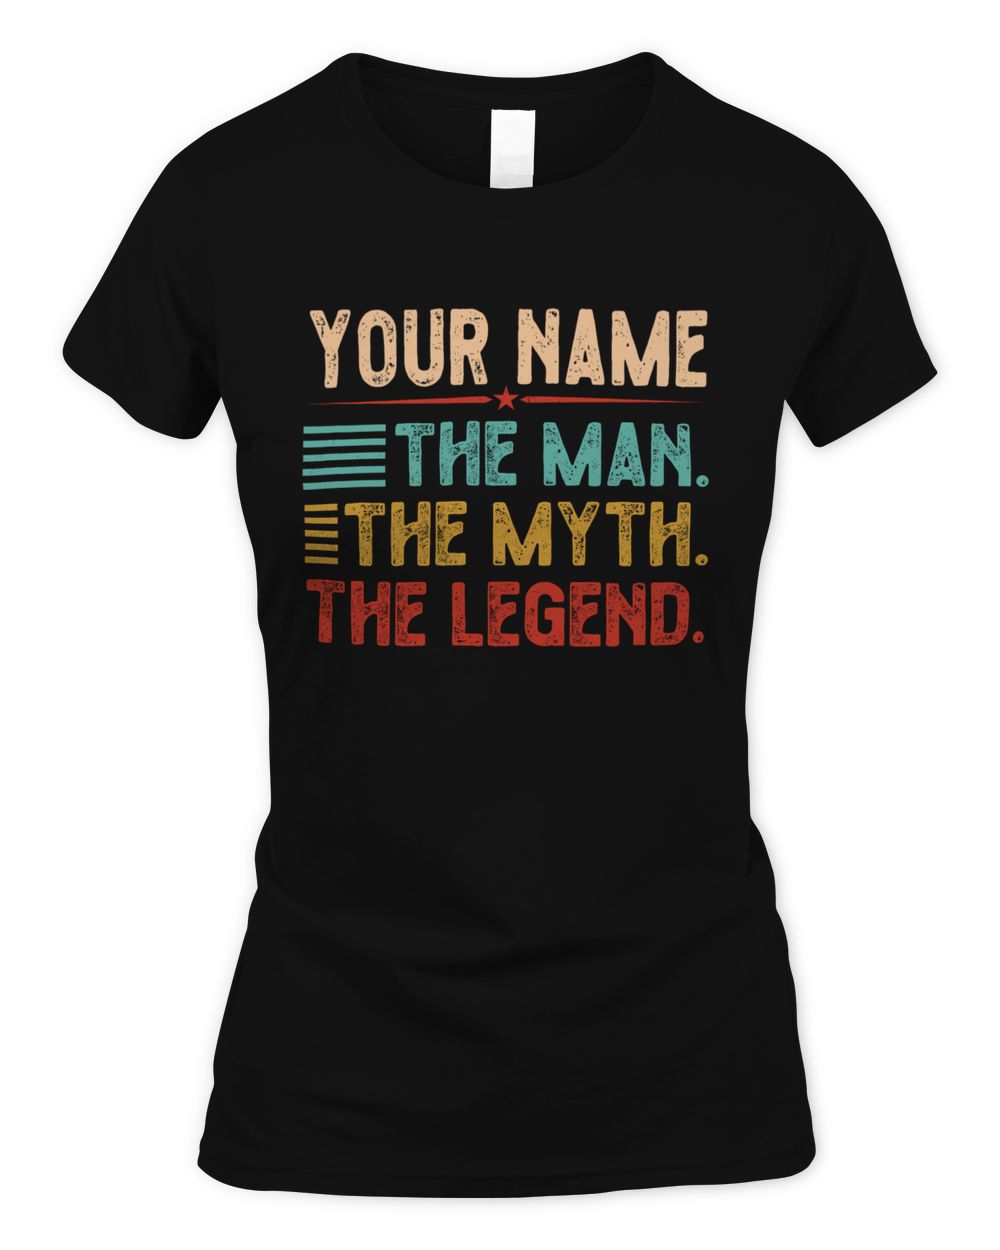 YOUR NAME. The Man. The Myth. The Legend. Great personalised T-Shirts Women's Standard T-Shirt black 